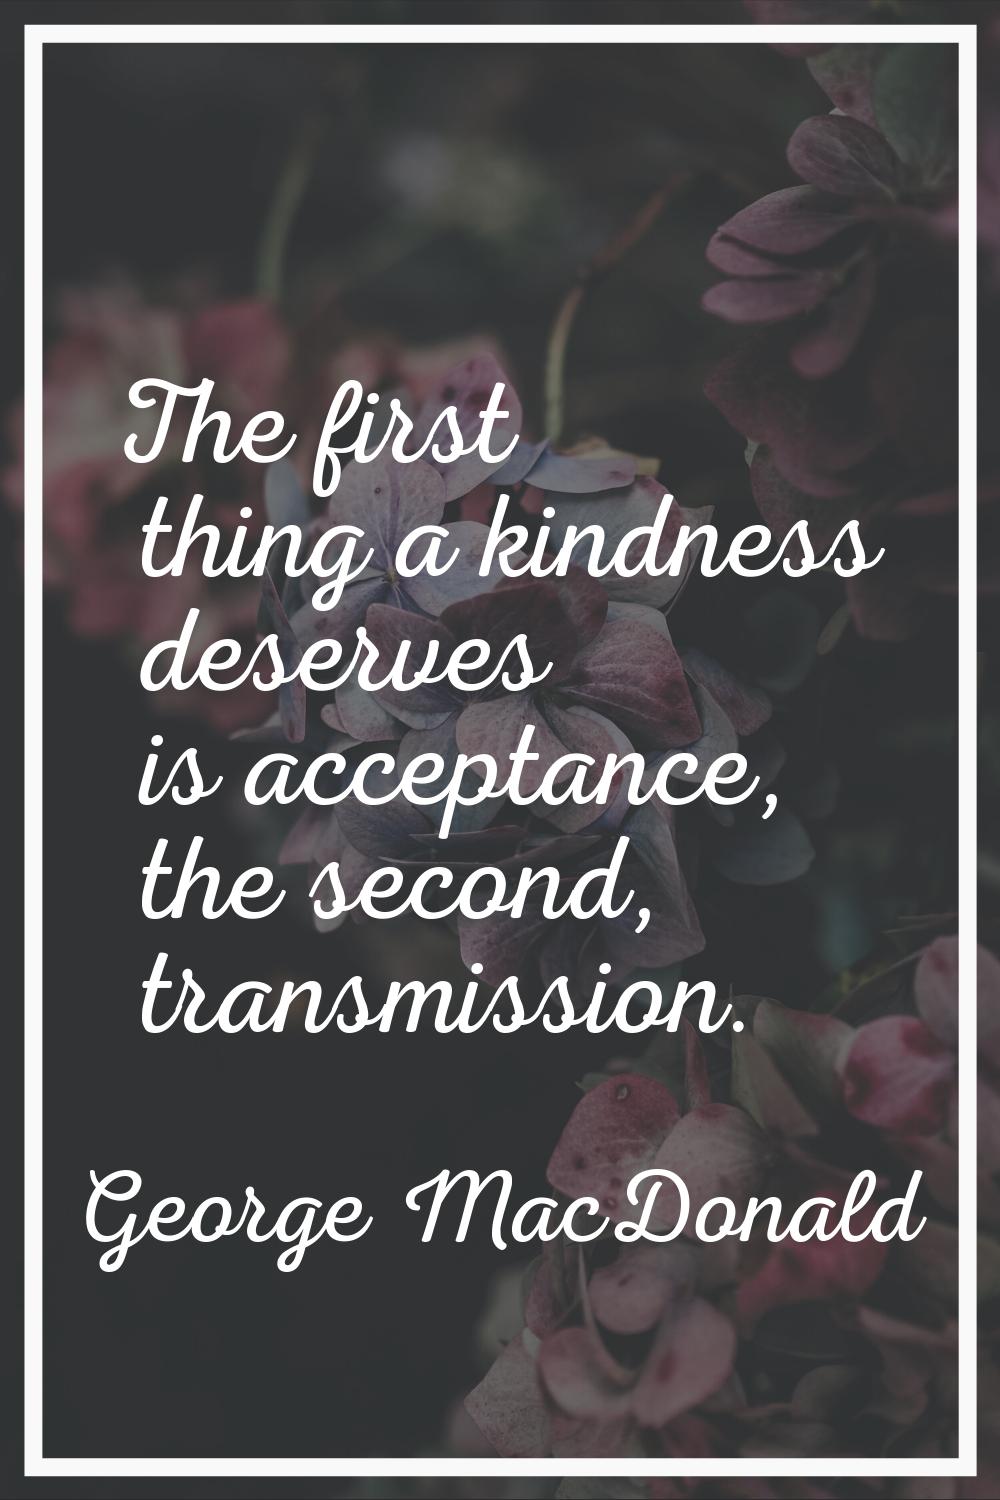 The first thing a kindness deserves is acceptance, the second, transmission.